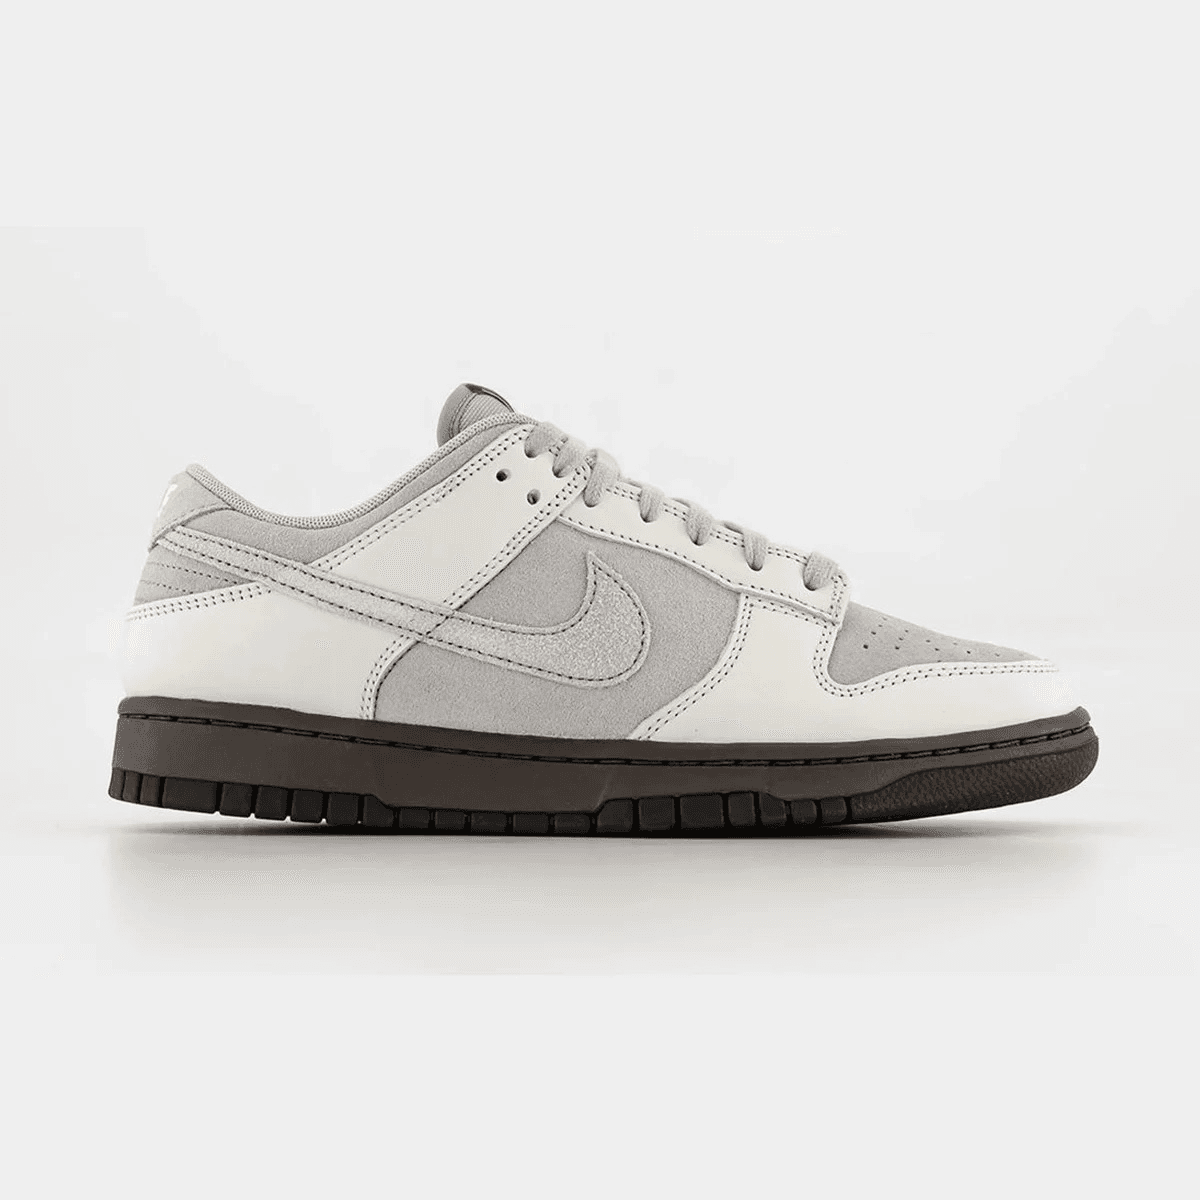 The Nike Dunk Low Iornstone Arrives Spring 2023